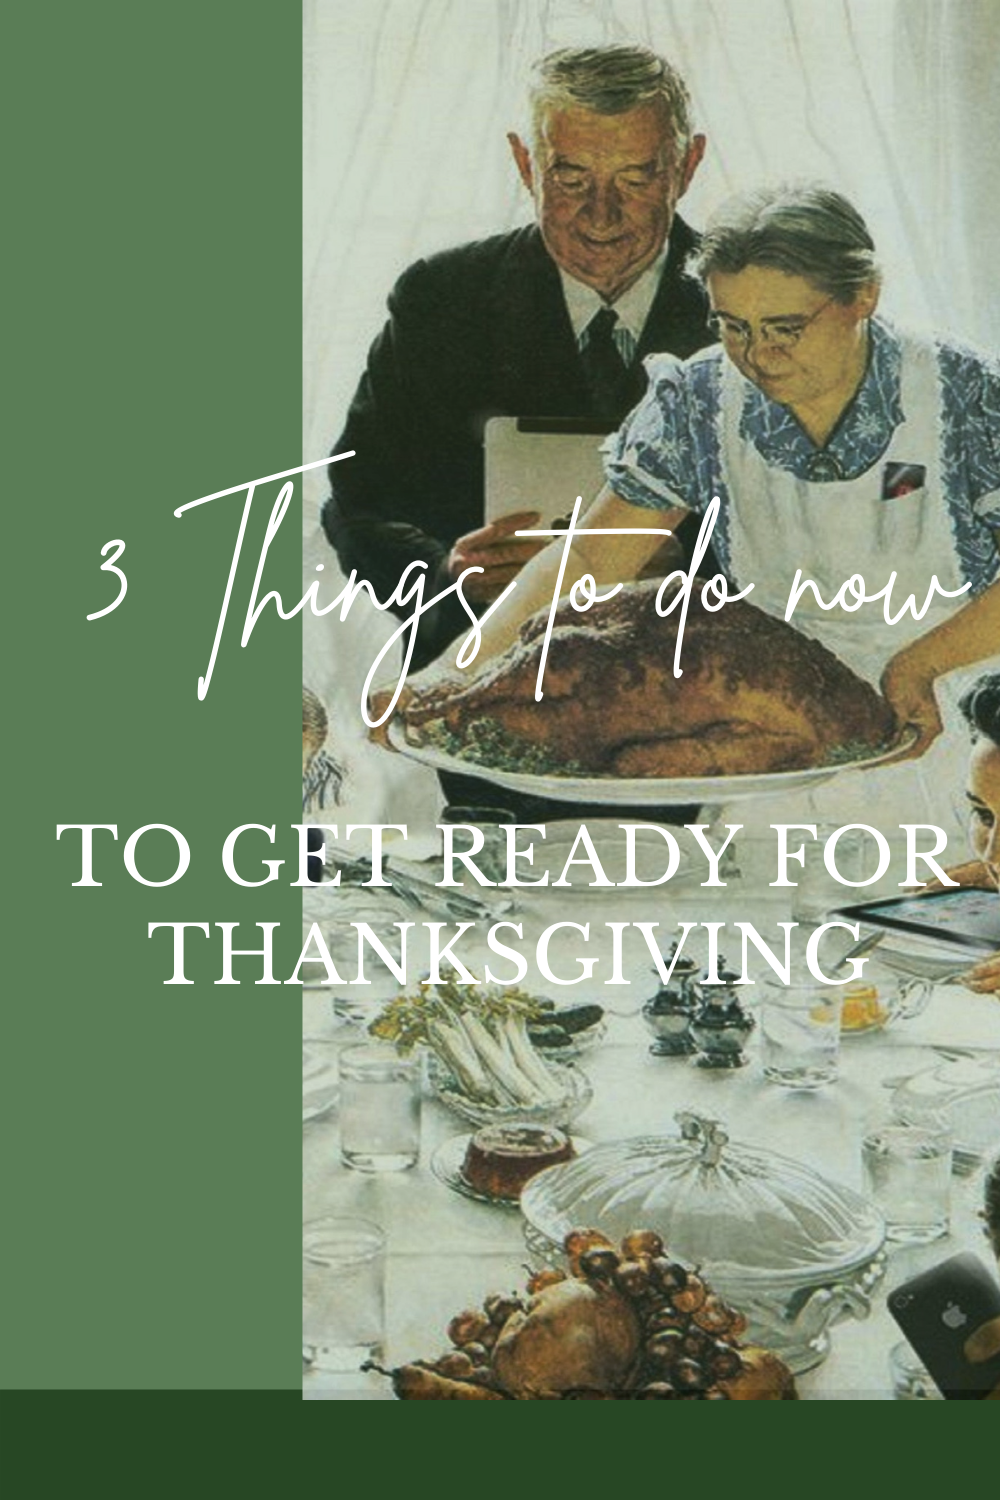 3 Things You Can Do Now to Get Ready for Thanksgiving.